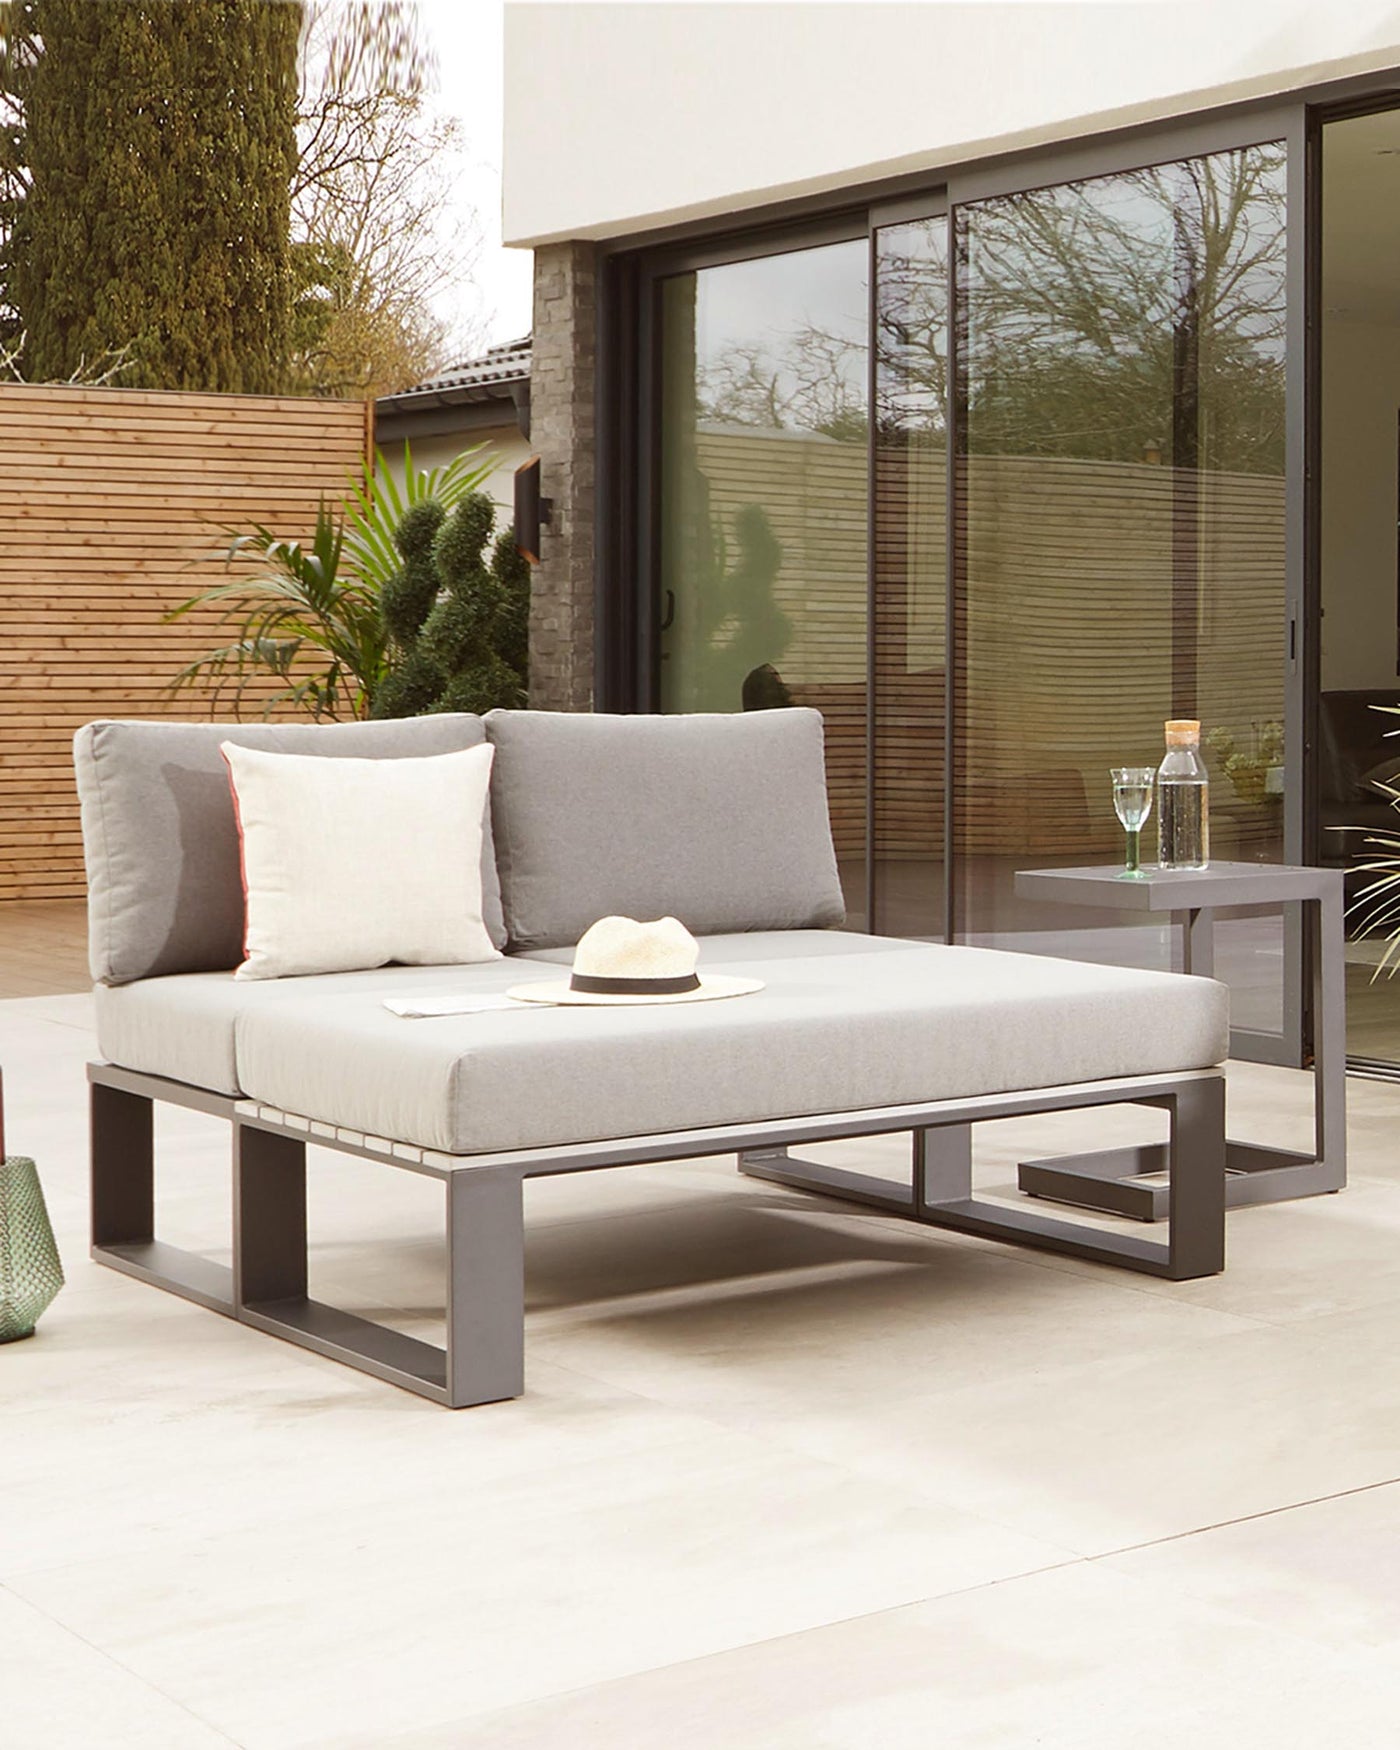 Modern outdoor lounge set featuring a sleek, grey metal frame chaise lounge with light grey cushions and complementary throw pillows, paired with a matching grey metal frame side table with a clear glass top.